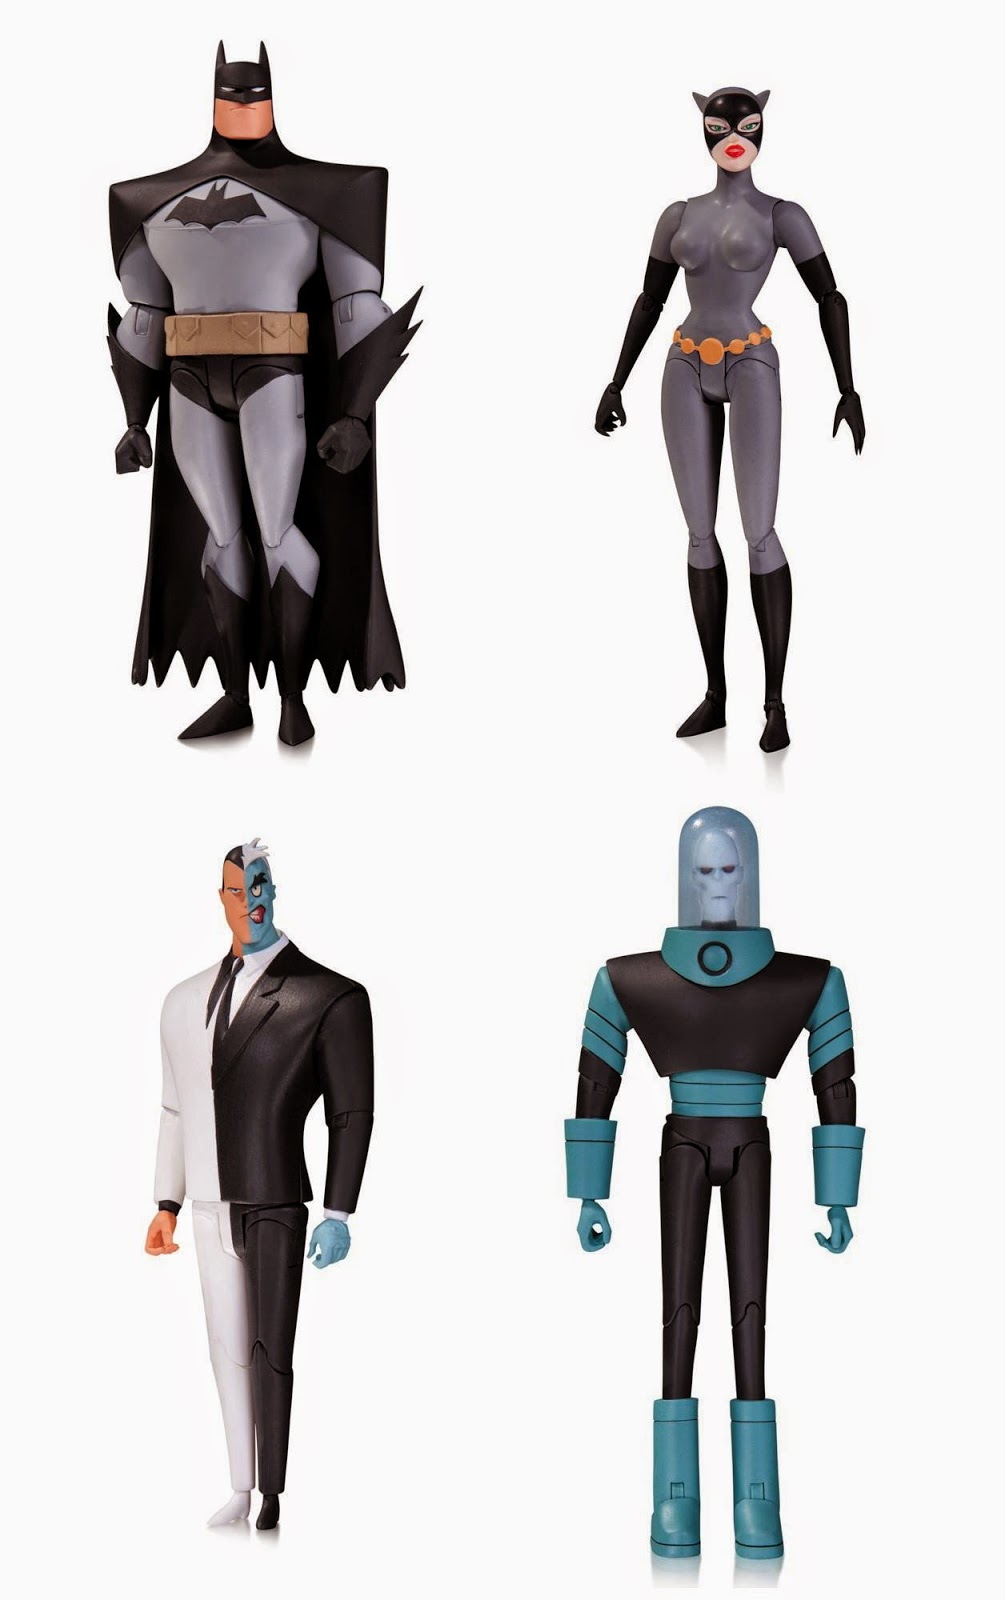 Batman The Animated Series Wave 1 6” Action Figure by DC Collectibles - Batman, Catwoman, Two-Face & Mr. Freeze